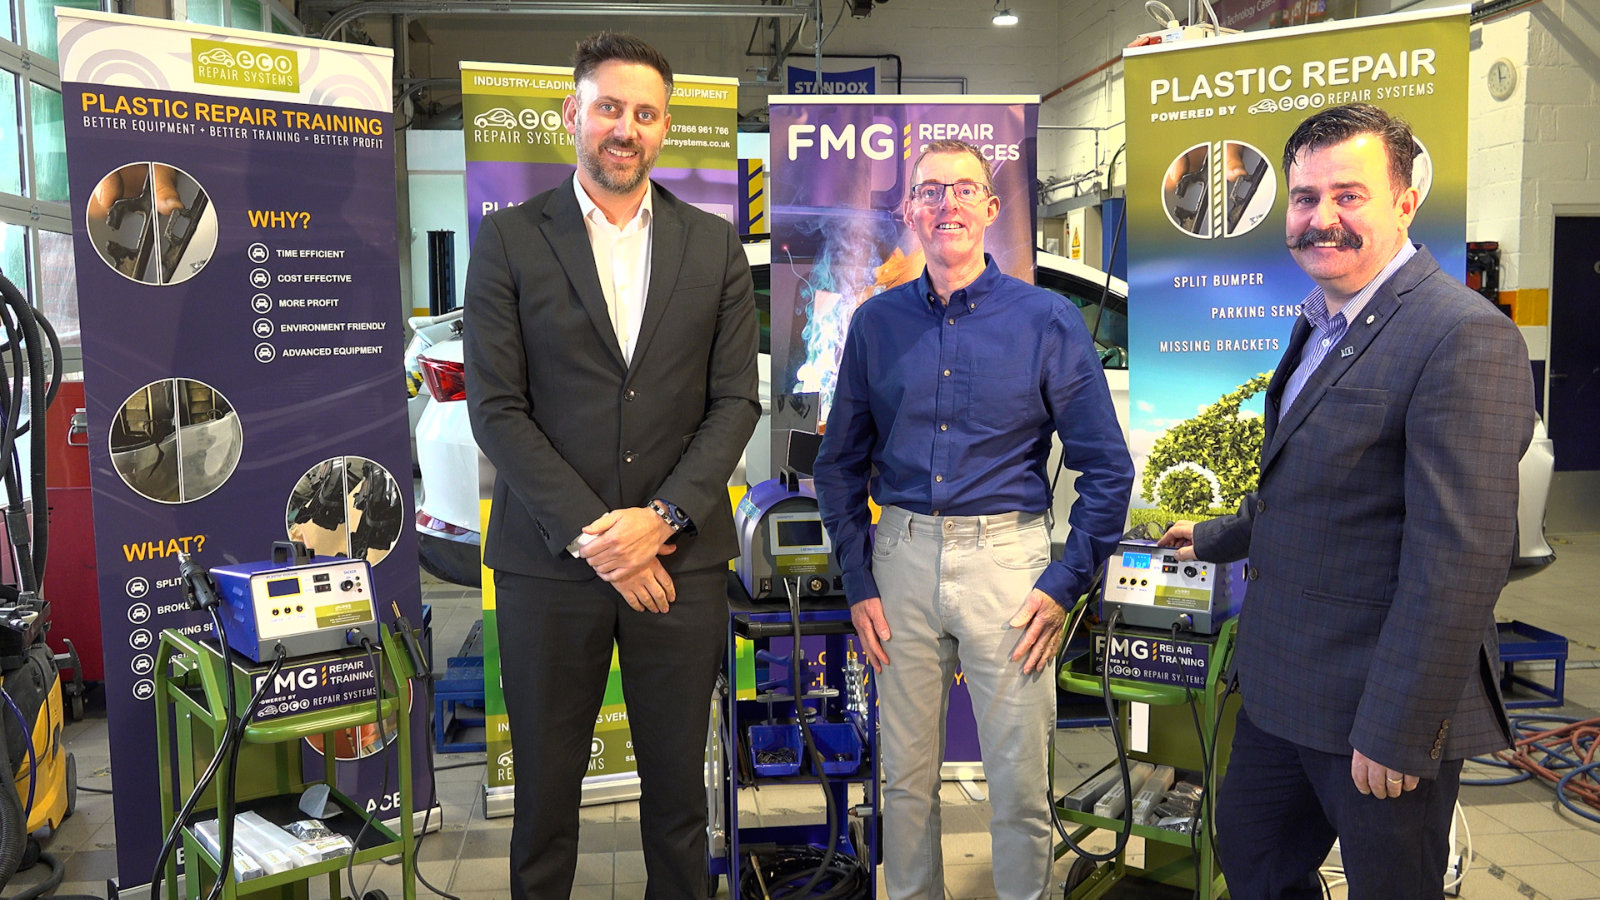 Plastic Repair Training Partnership Launched by Eco Repair Systems and FMG Repair Services across its network